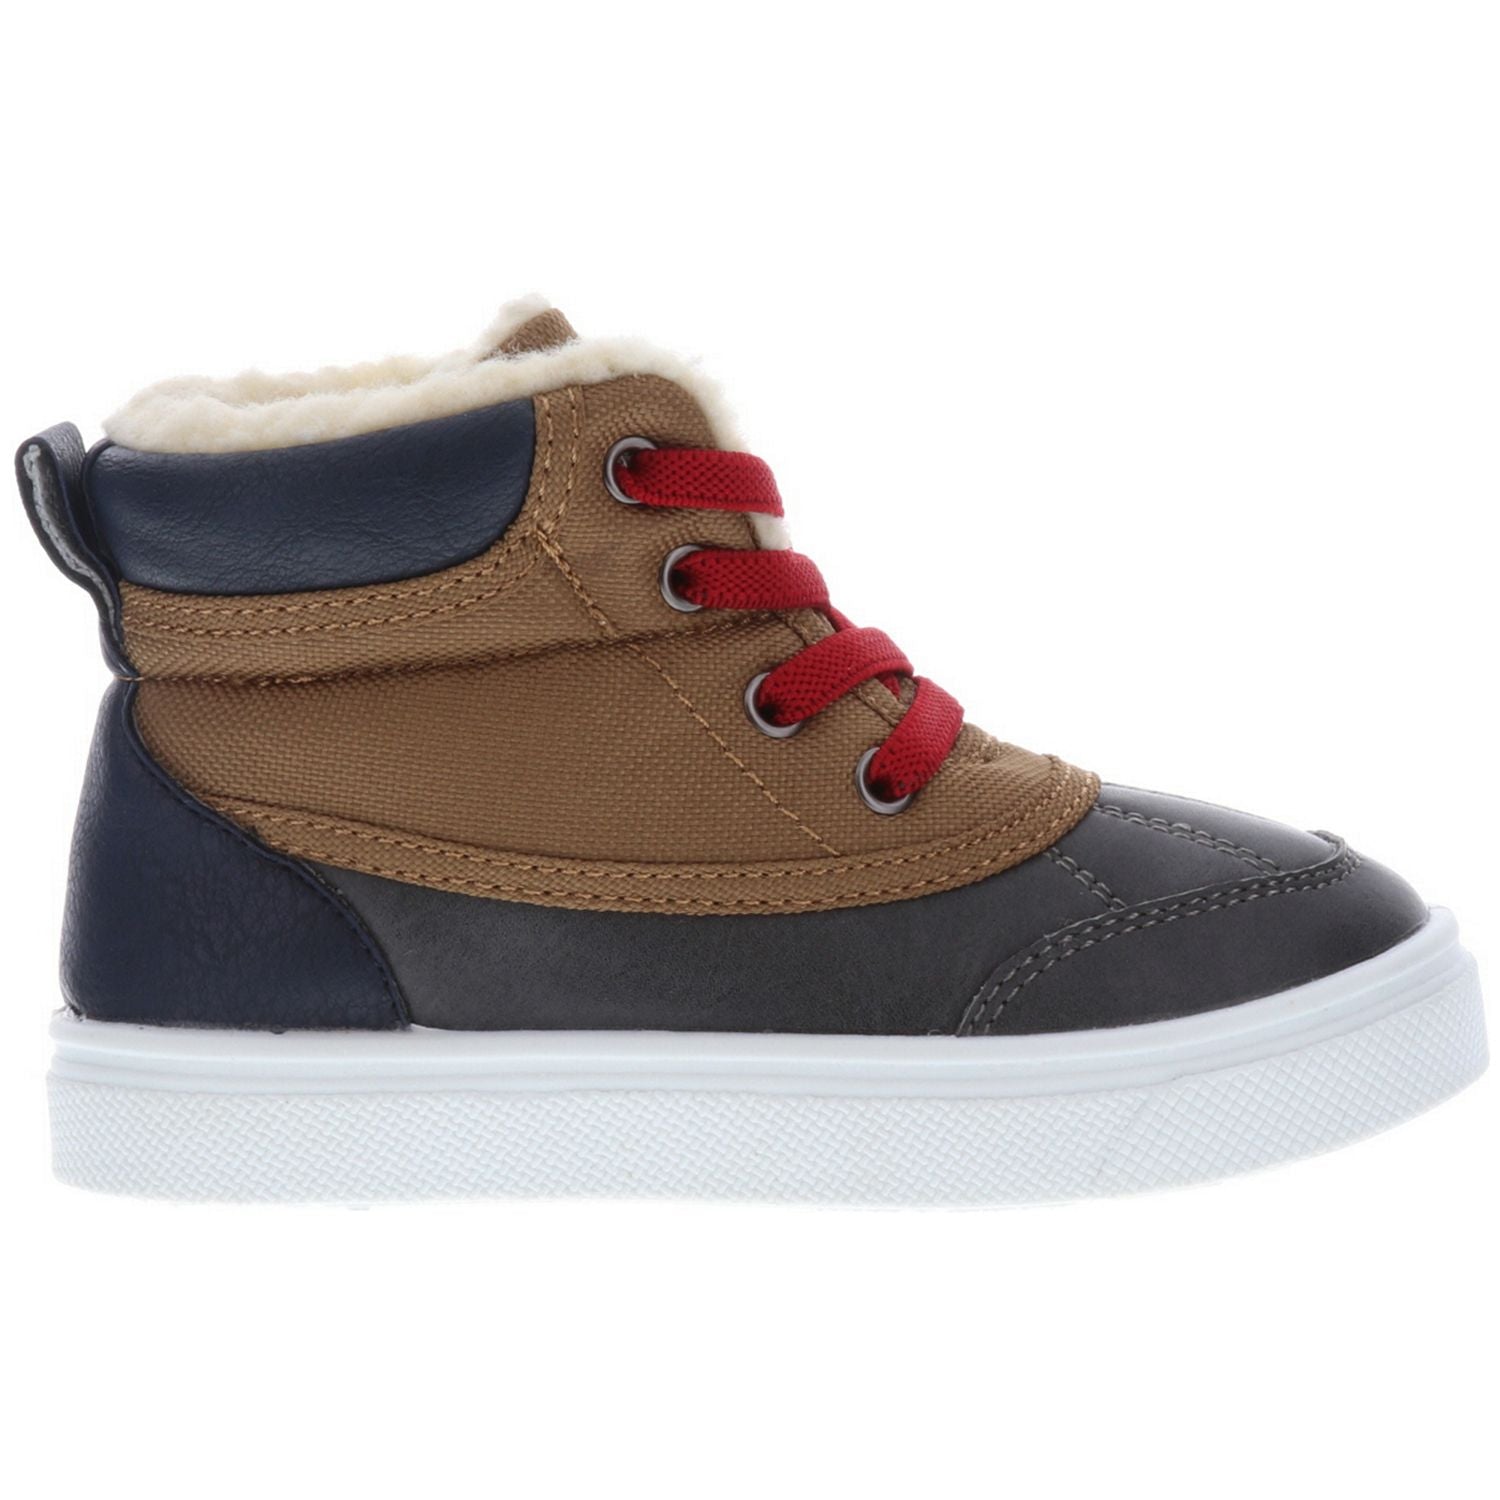 Oomphies Finn Young Boys Shoes 5-12 